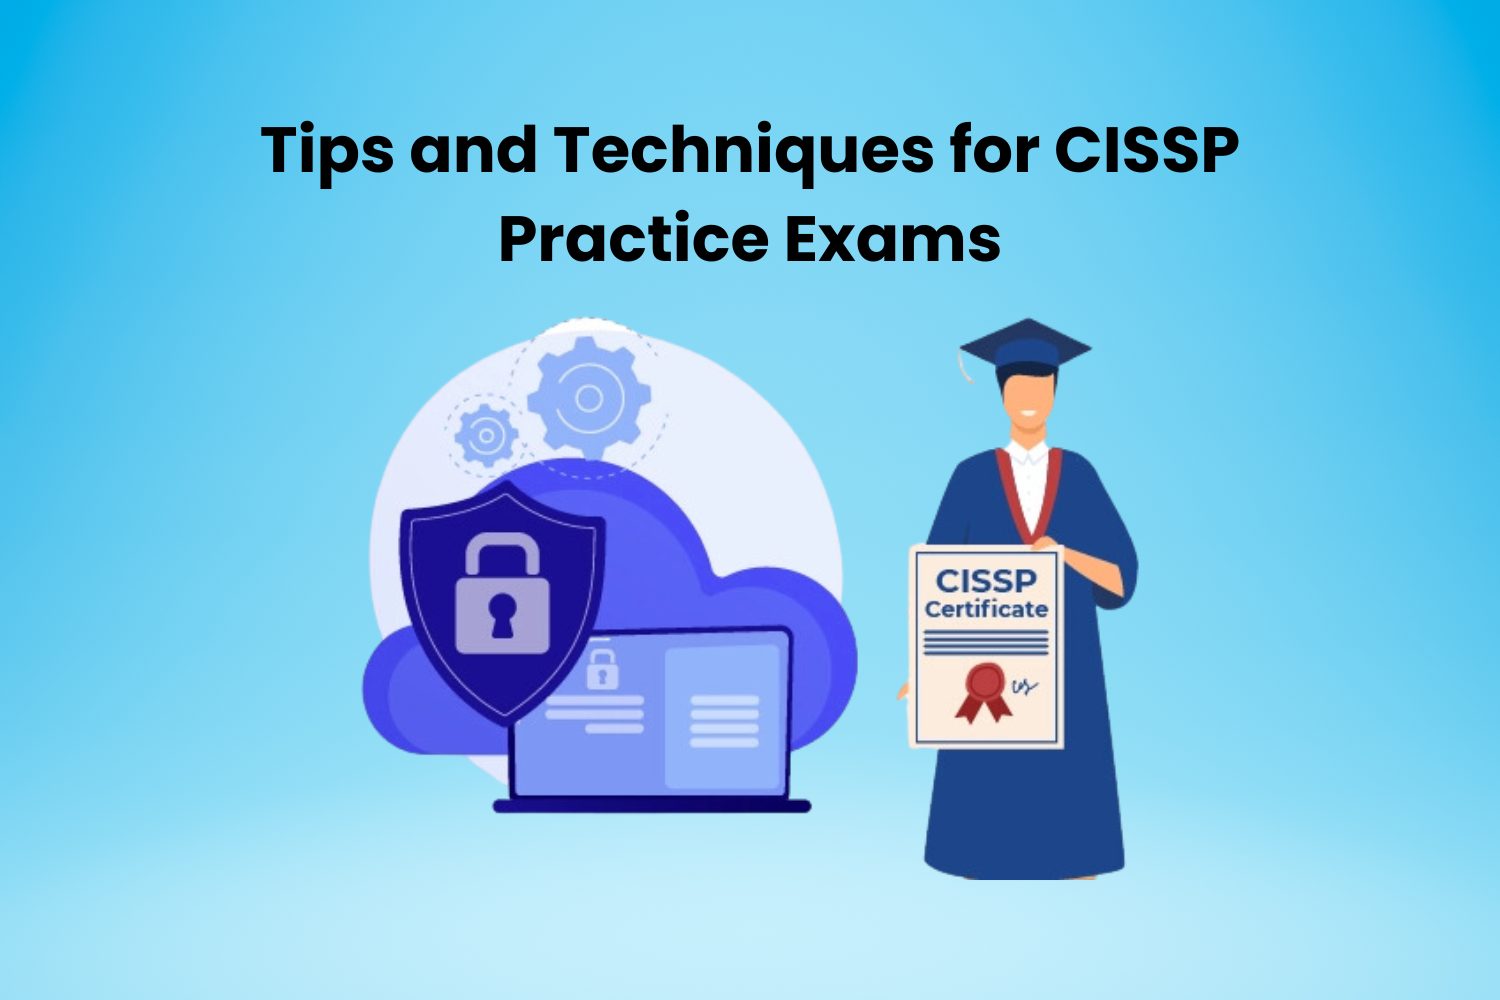 Tips And Techniques For CISSP Practice Exams